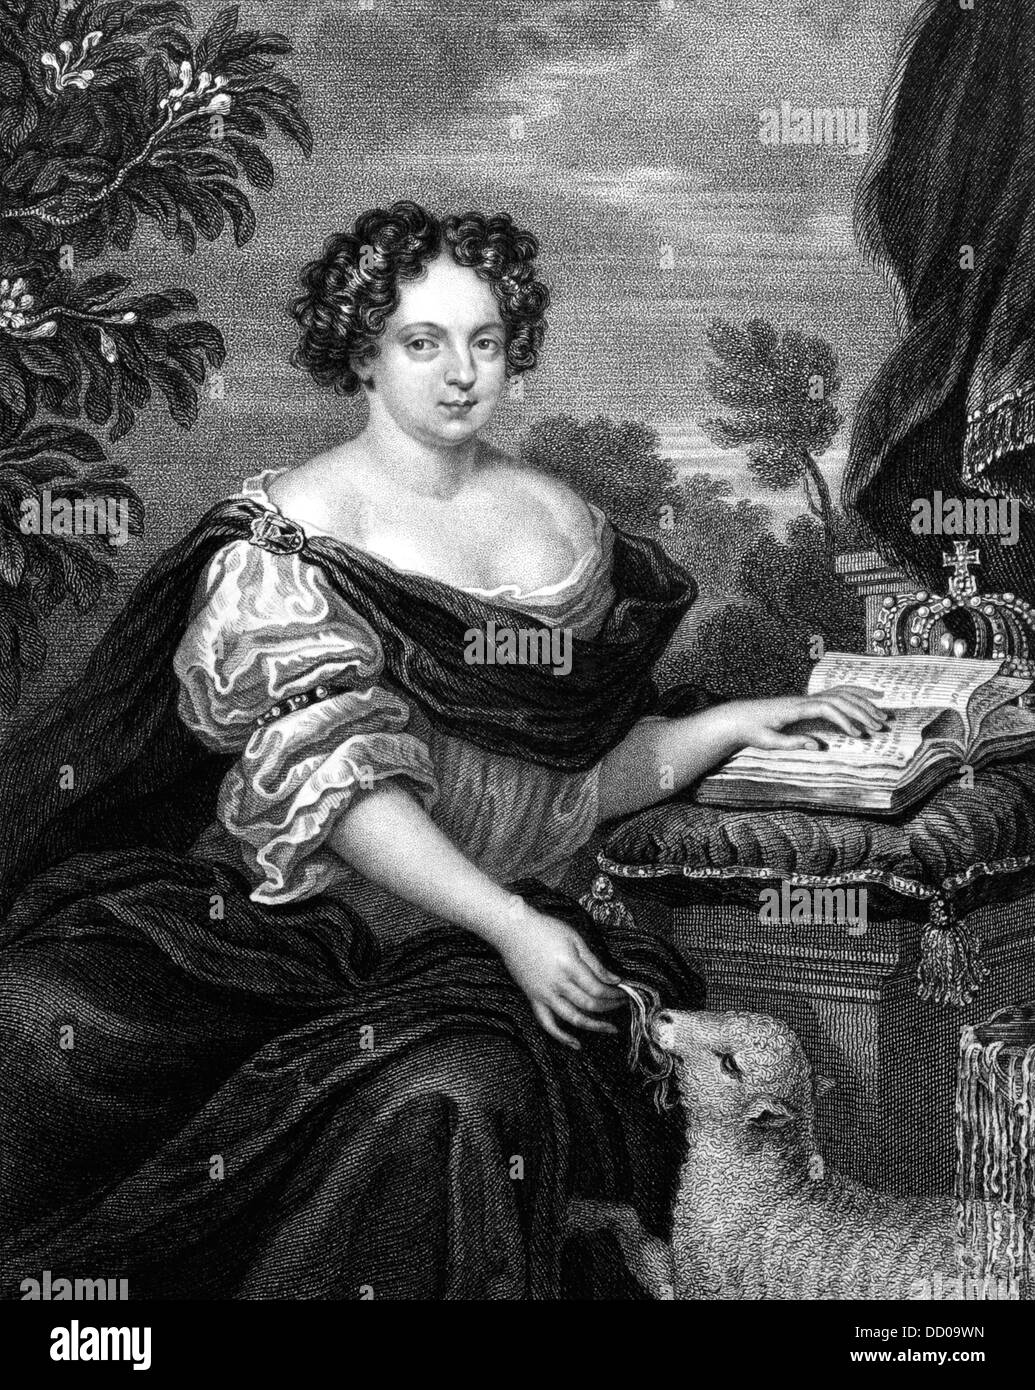 Catherine of Braganza (1638-1705) on engraving from 1830. Stock Photo